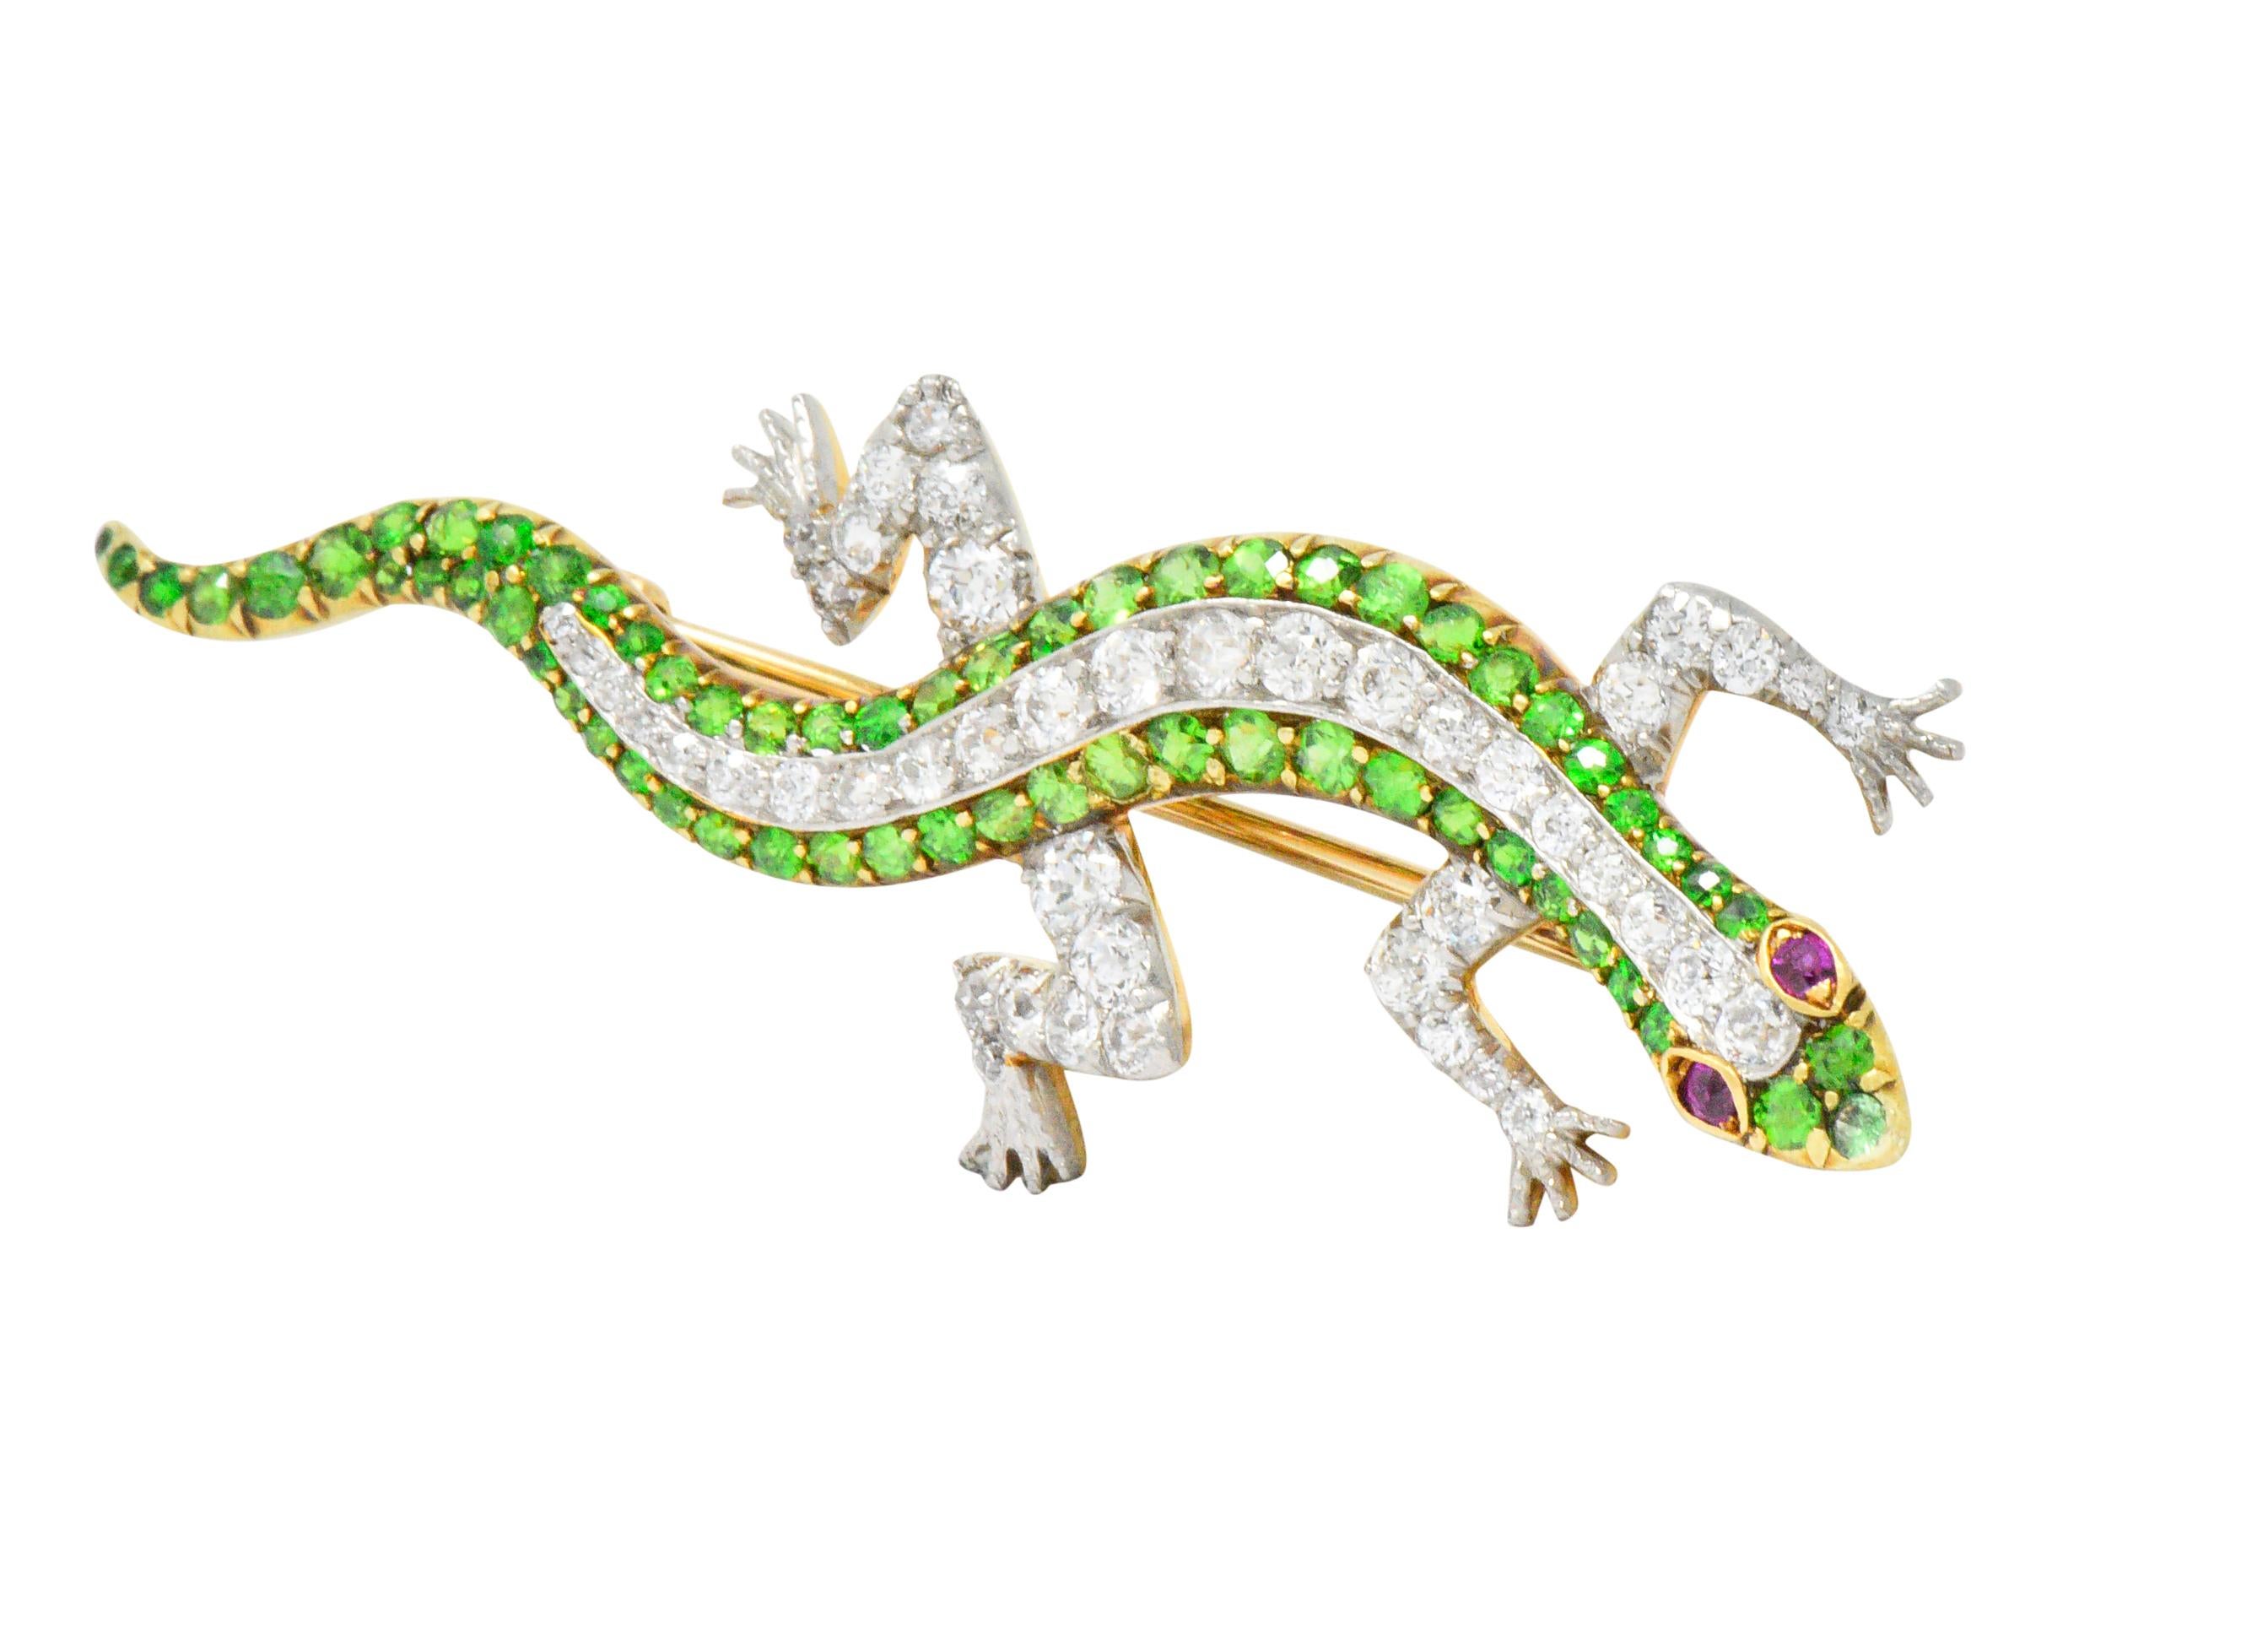 Delightfully designed lizard with old European cut diamonds set on the back and limbs, weighing approximately 1.50 carats

Featuring a body set with old European cut demantoid garnets weighing approximately 1.85 carats total, bright sparkling vivid